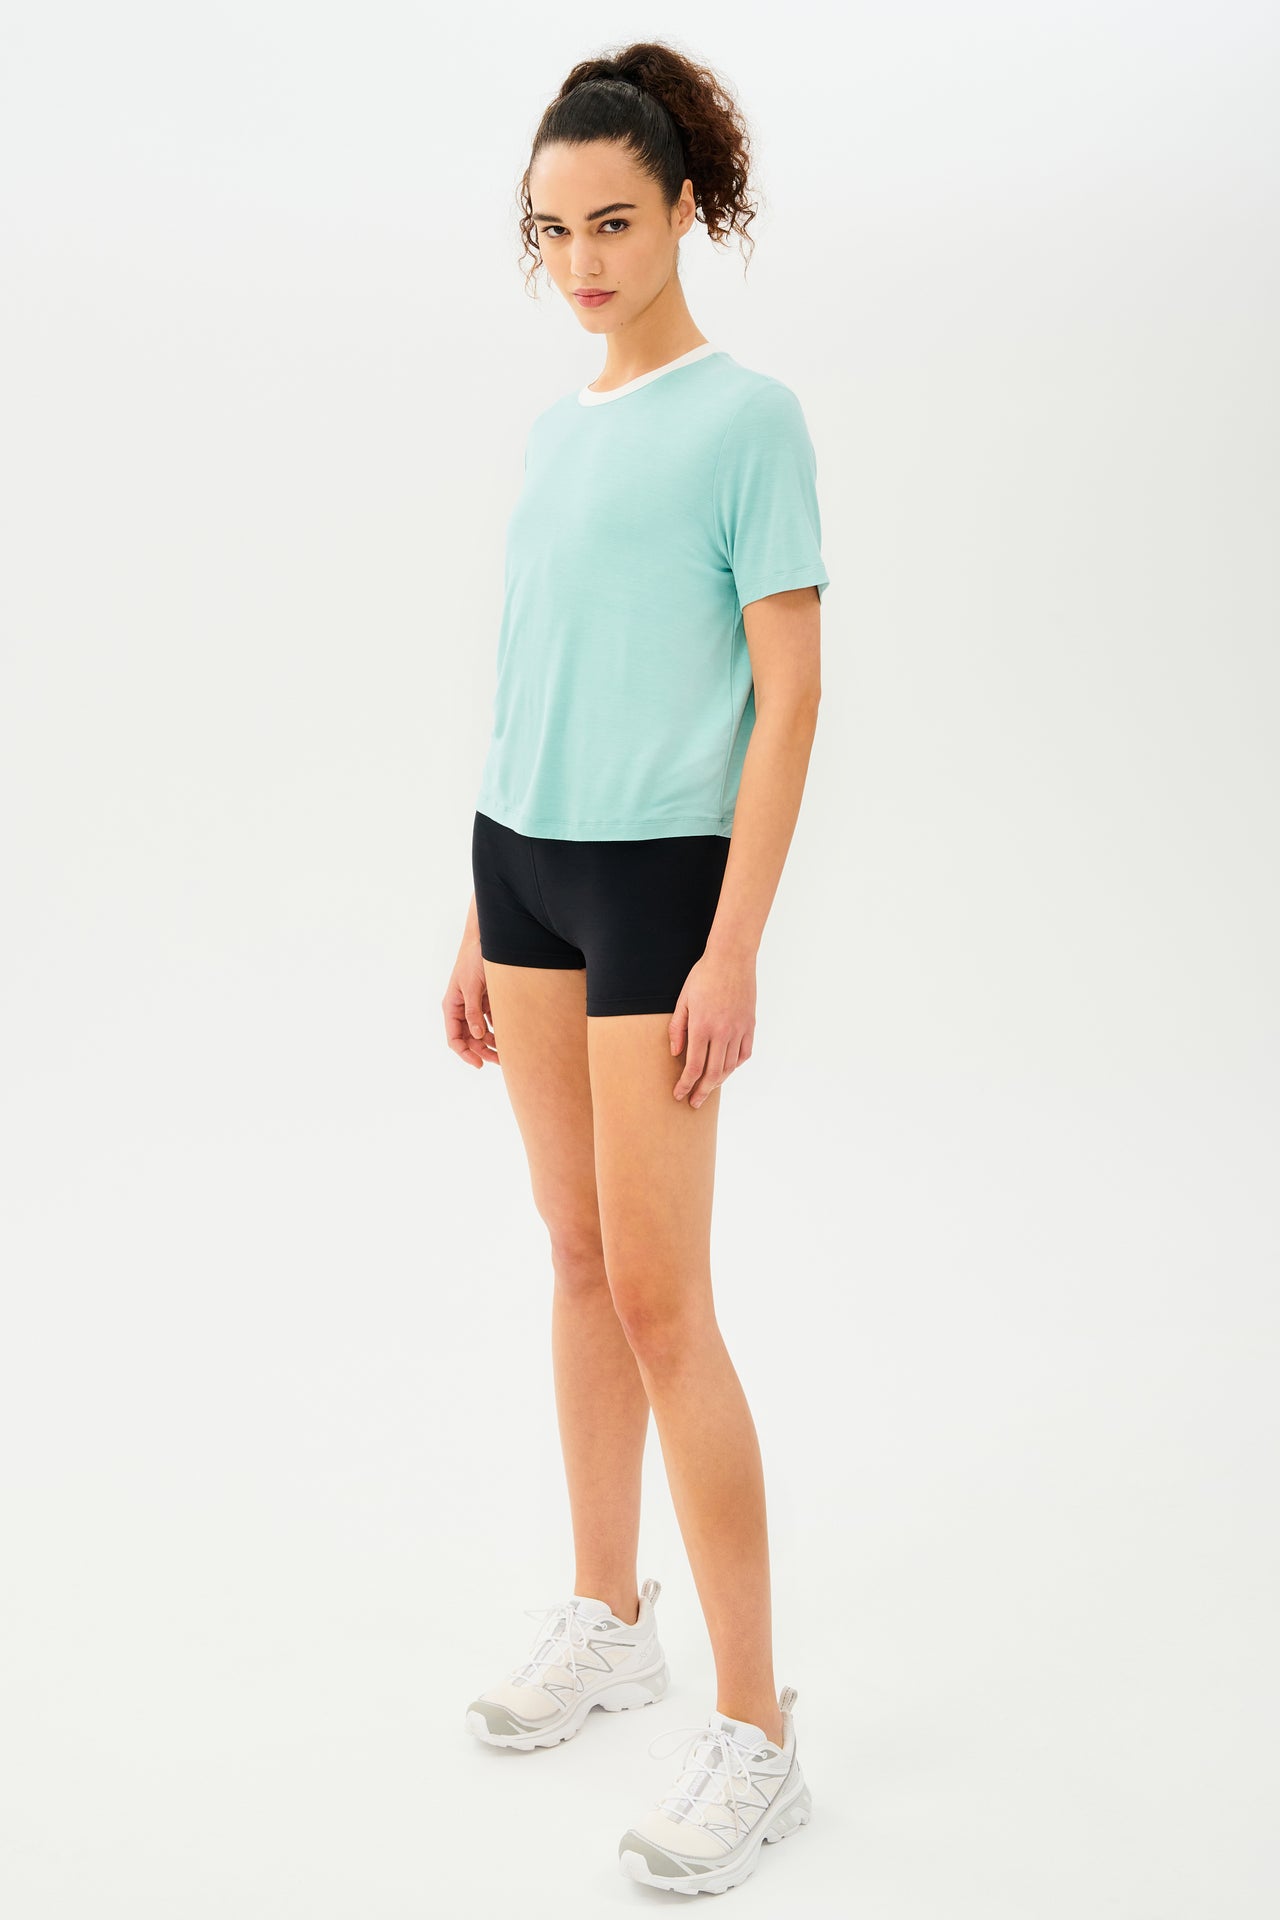 Full side view of girl wearing light blue cropped short sleeve t-shirt with thin white neck hem and black bike shorts with white shoes